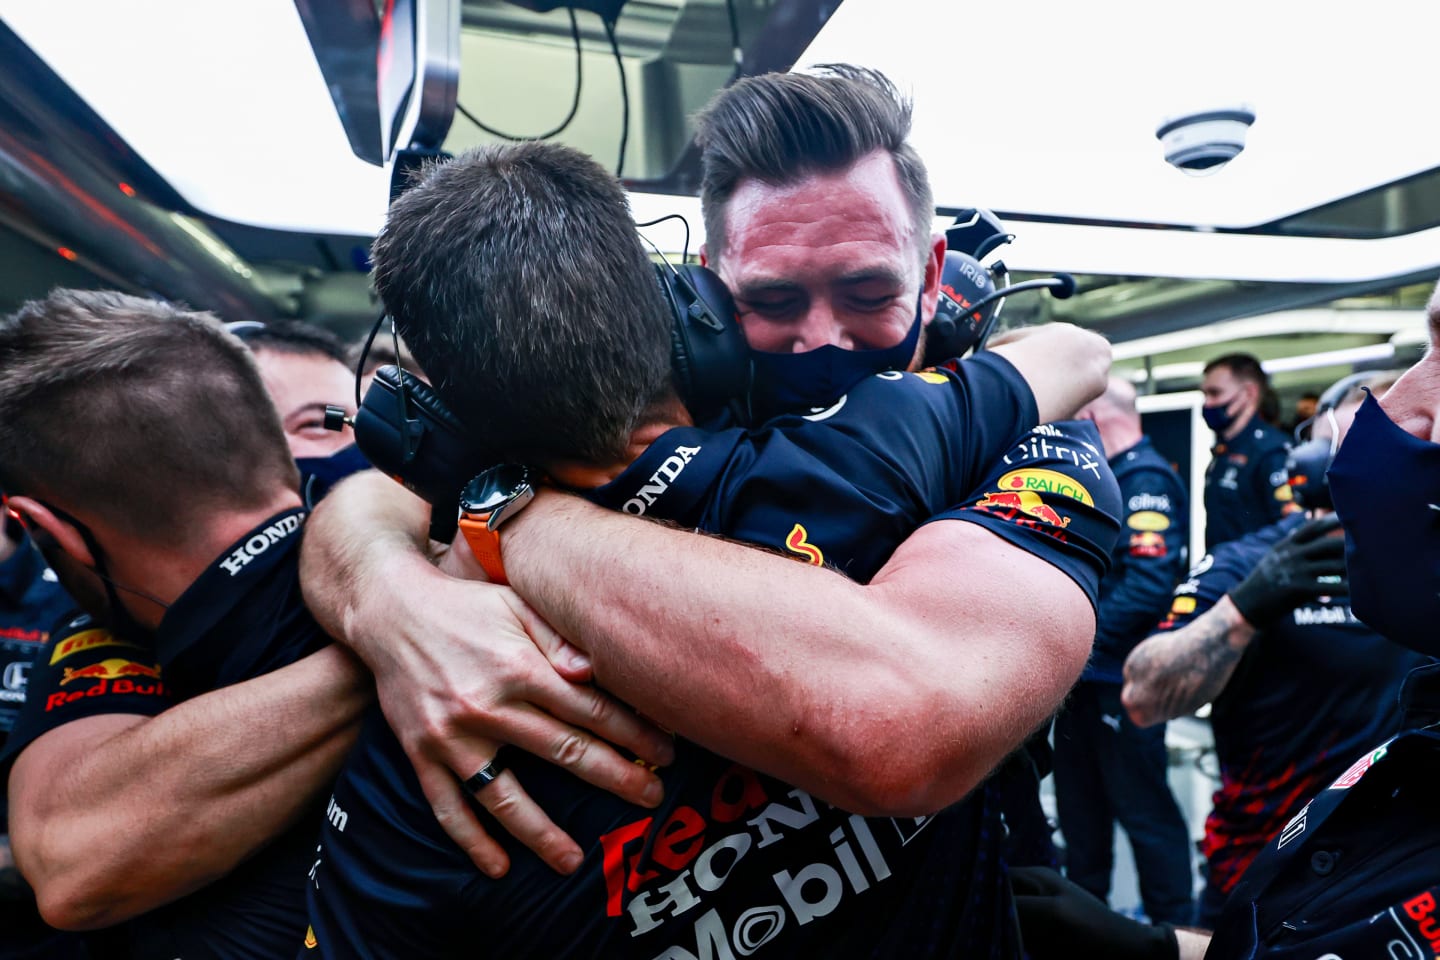 BAHRAIN, BAHRAIN - MARCH 27: The Red Bull Racing team celebrate the pole position of Max Verstappen of Netherlands and Red Bull Racing  during qualifying ahead of the F1 Grand Prix of Bahrain at Bahrain International Circuit on March 27, 2021 in Bahrain, Bahrain. (Photo by Mark Thompson/Getty Images)